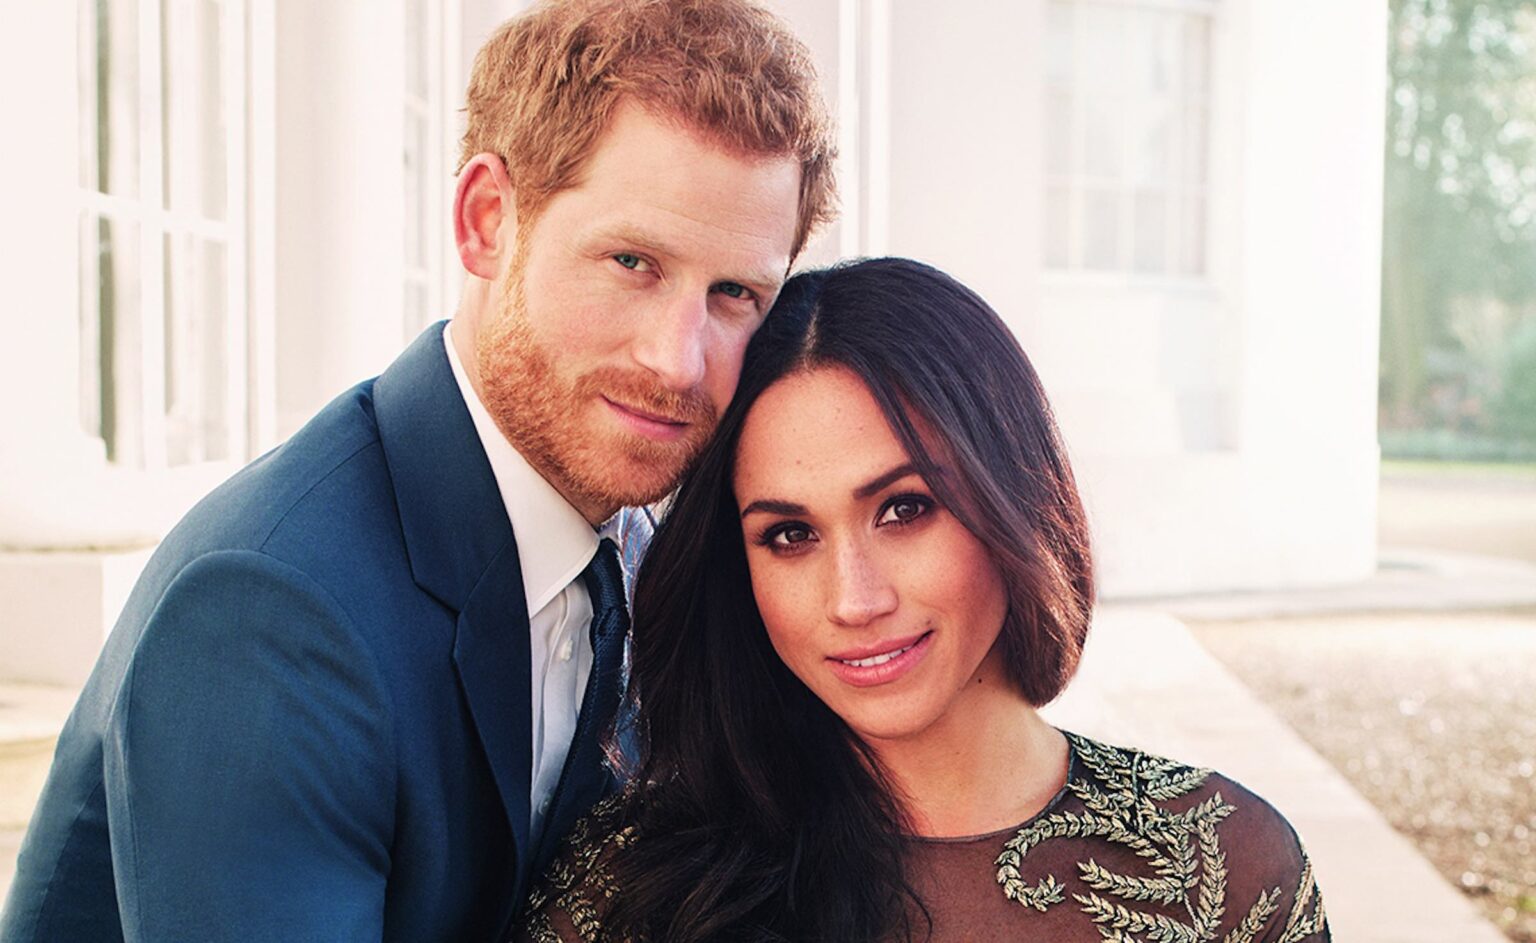 Meghan Markle and Prince Harry are embroiled in a lawsuit with British tabloid 'Daily Mail'. What secret did the tabloid reveal?